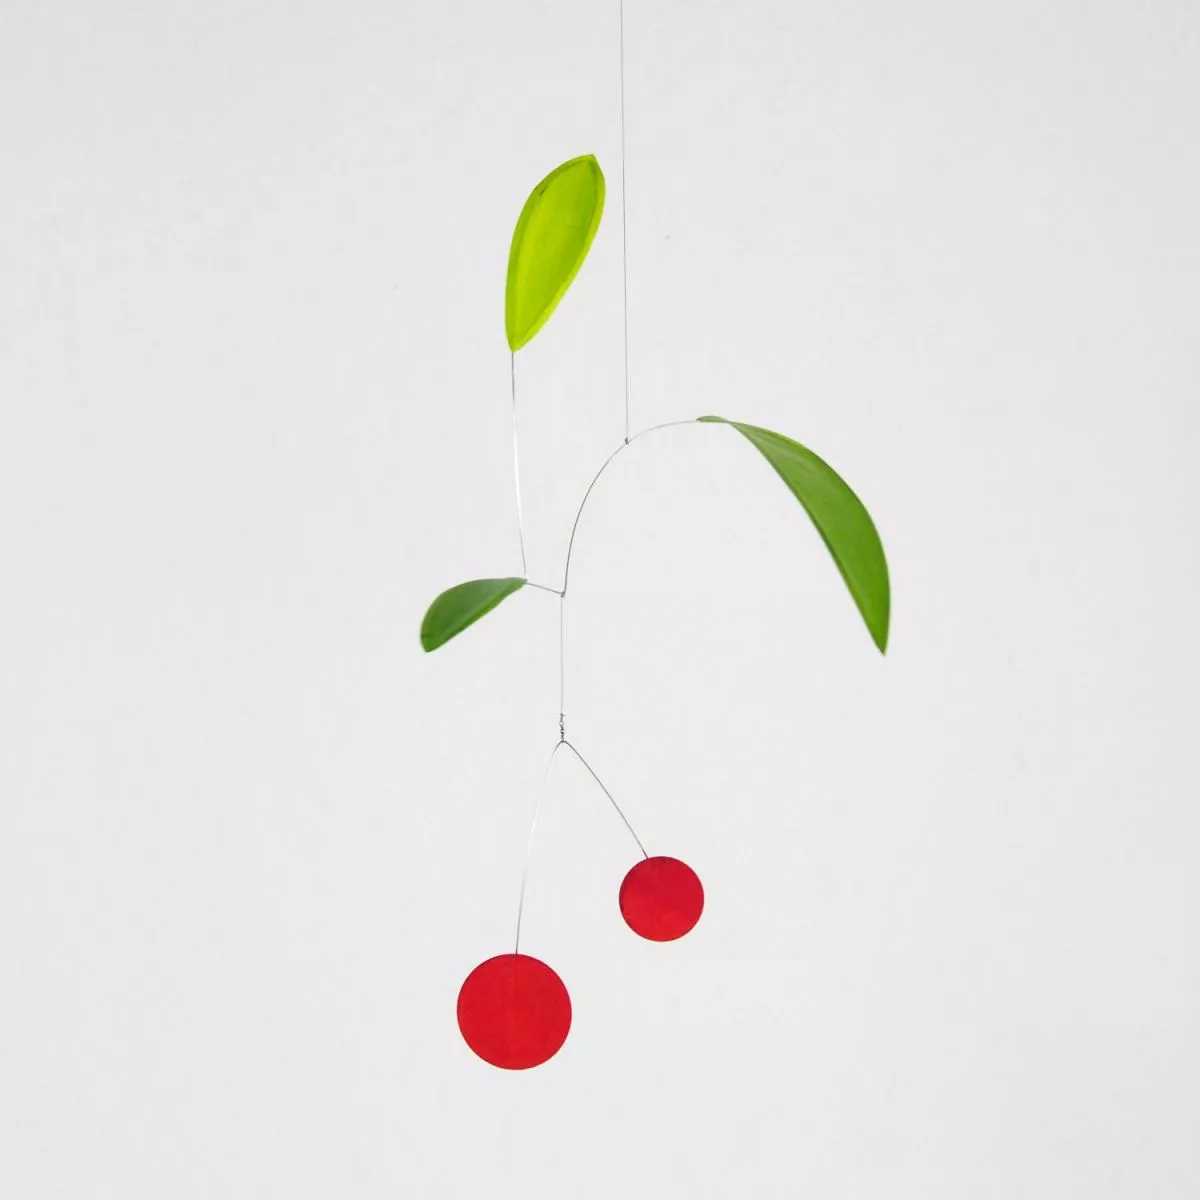 Handmade Art Mobile "Cerezas" made of Lacquered Paper (Small)